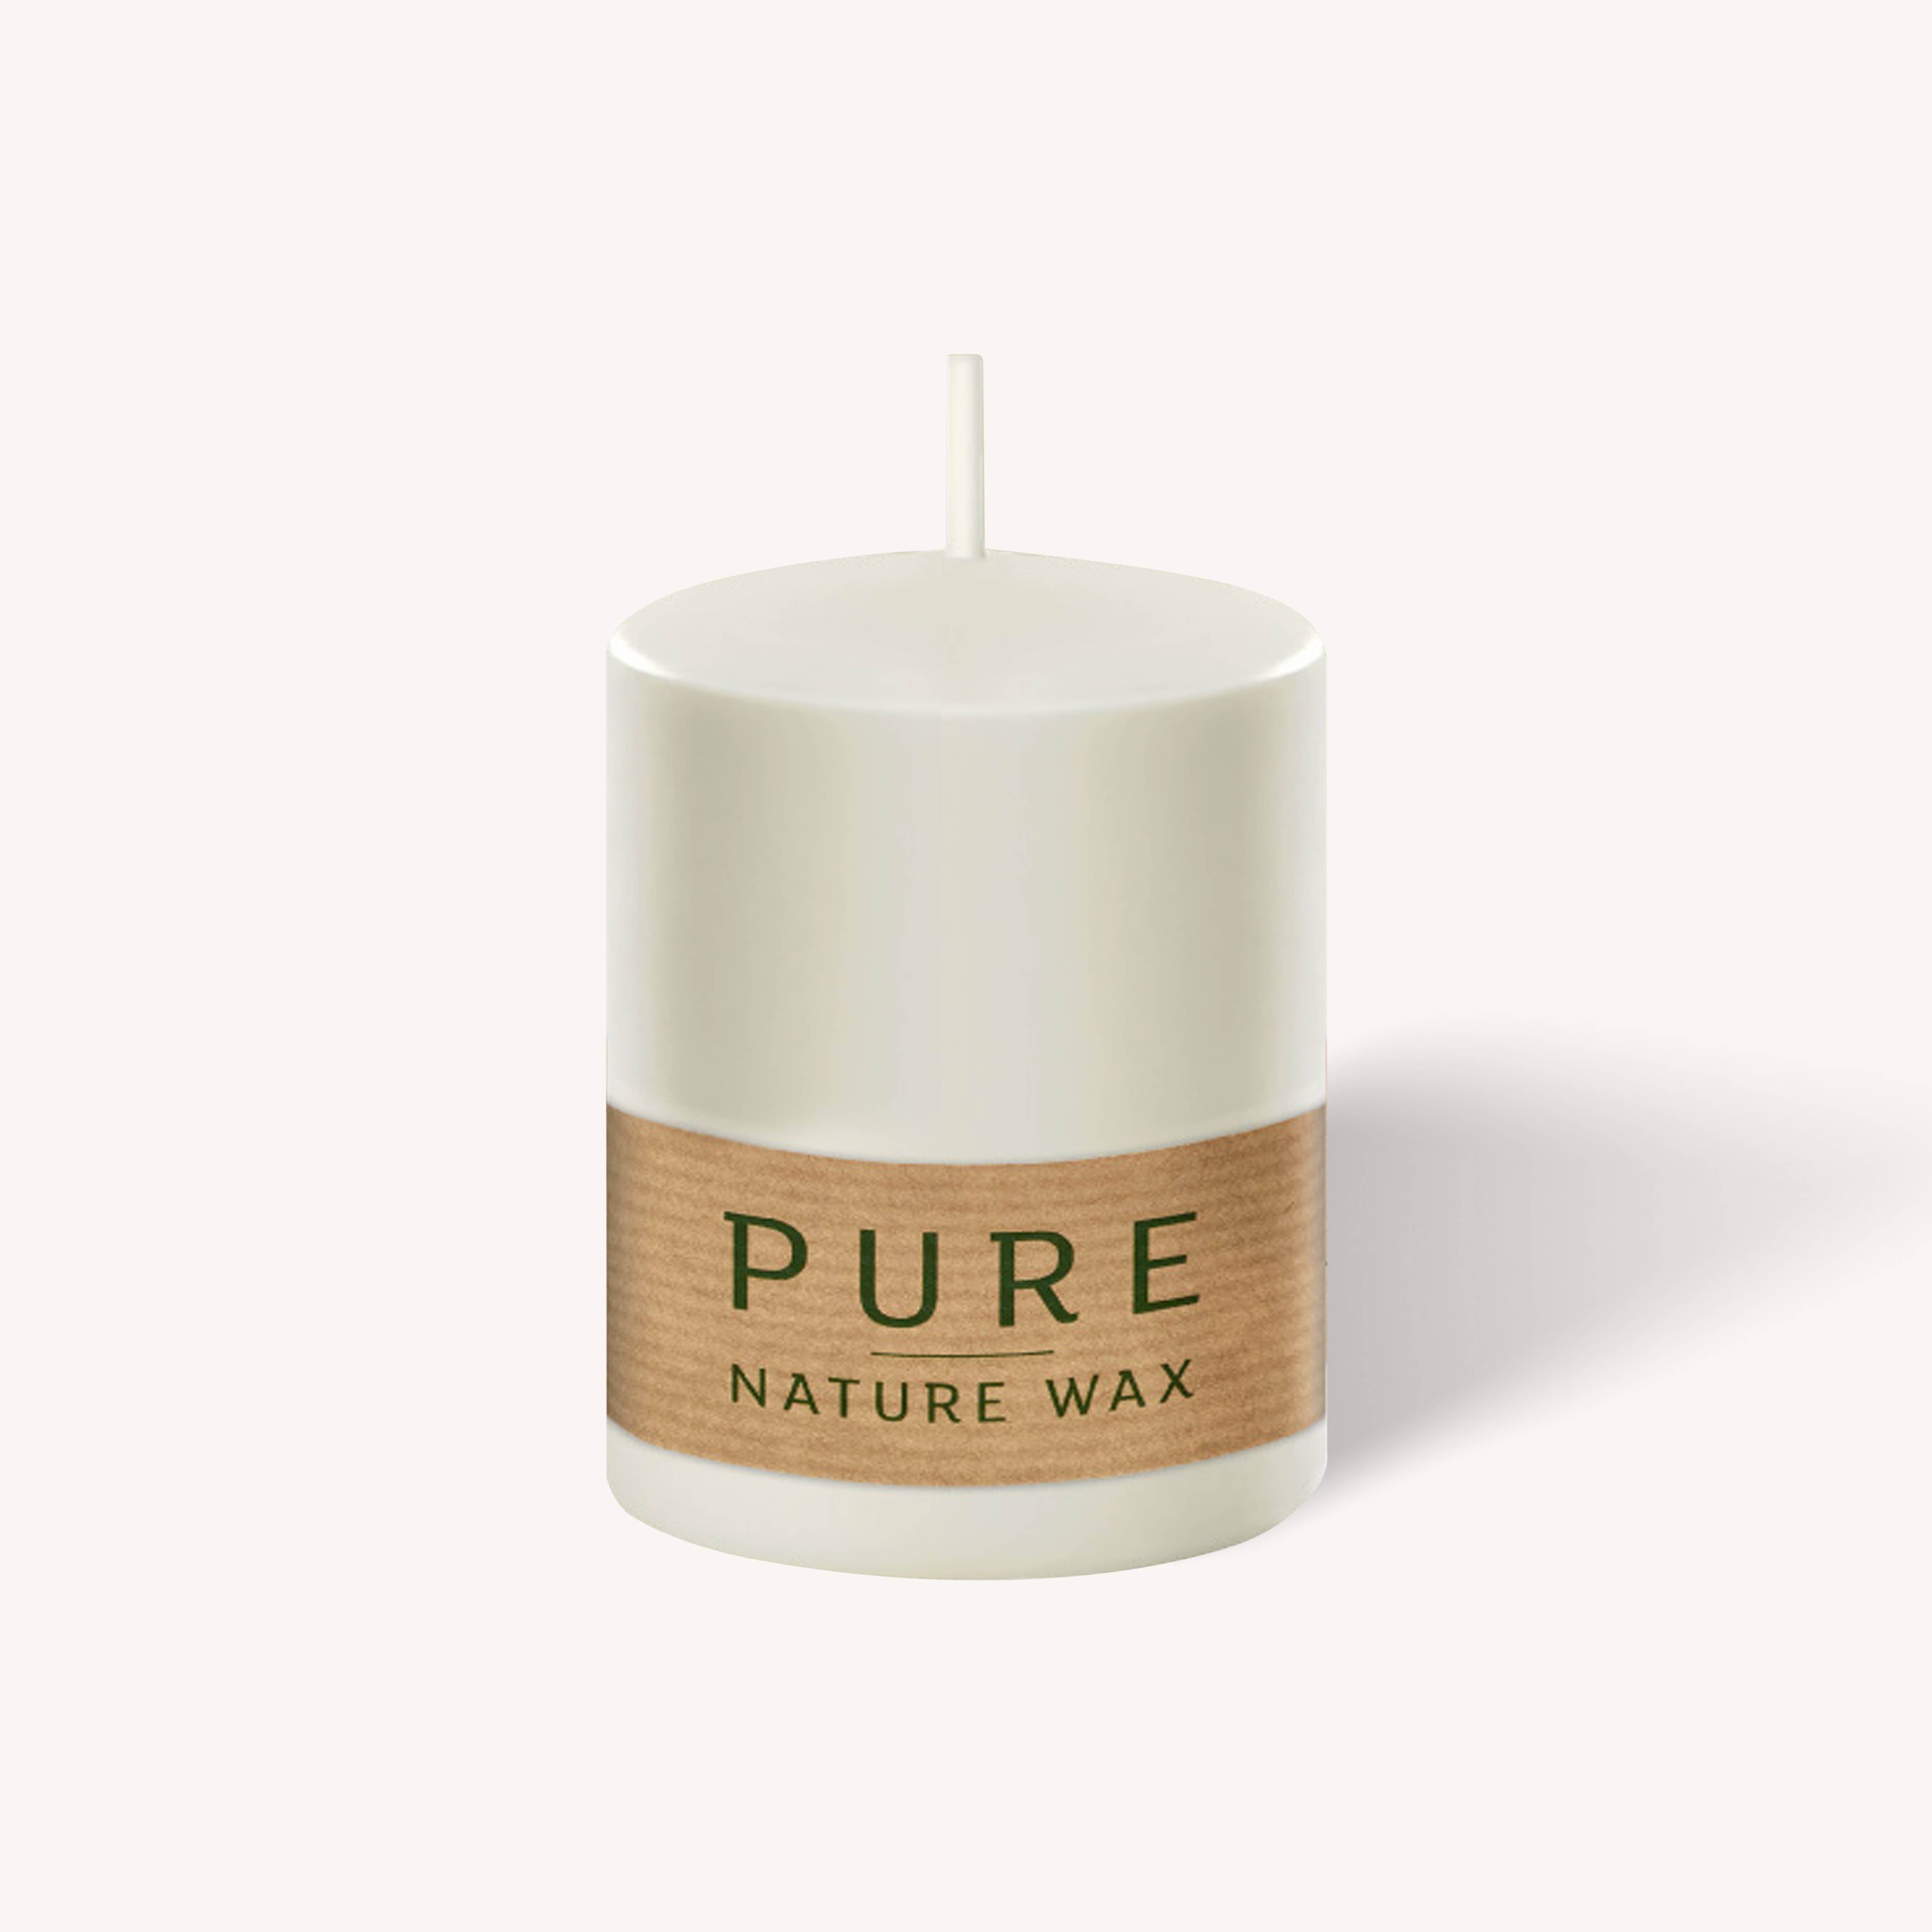 Pure Nature Wax White Pillar Candle - 2.7" x 3.5" - 3 Pack